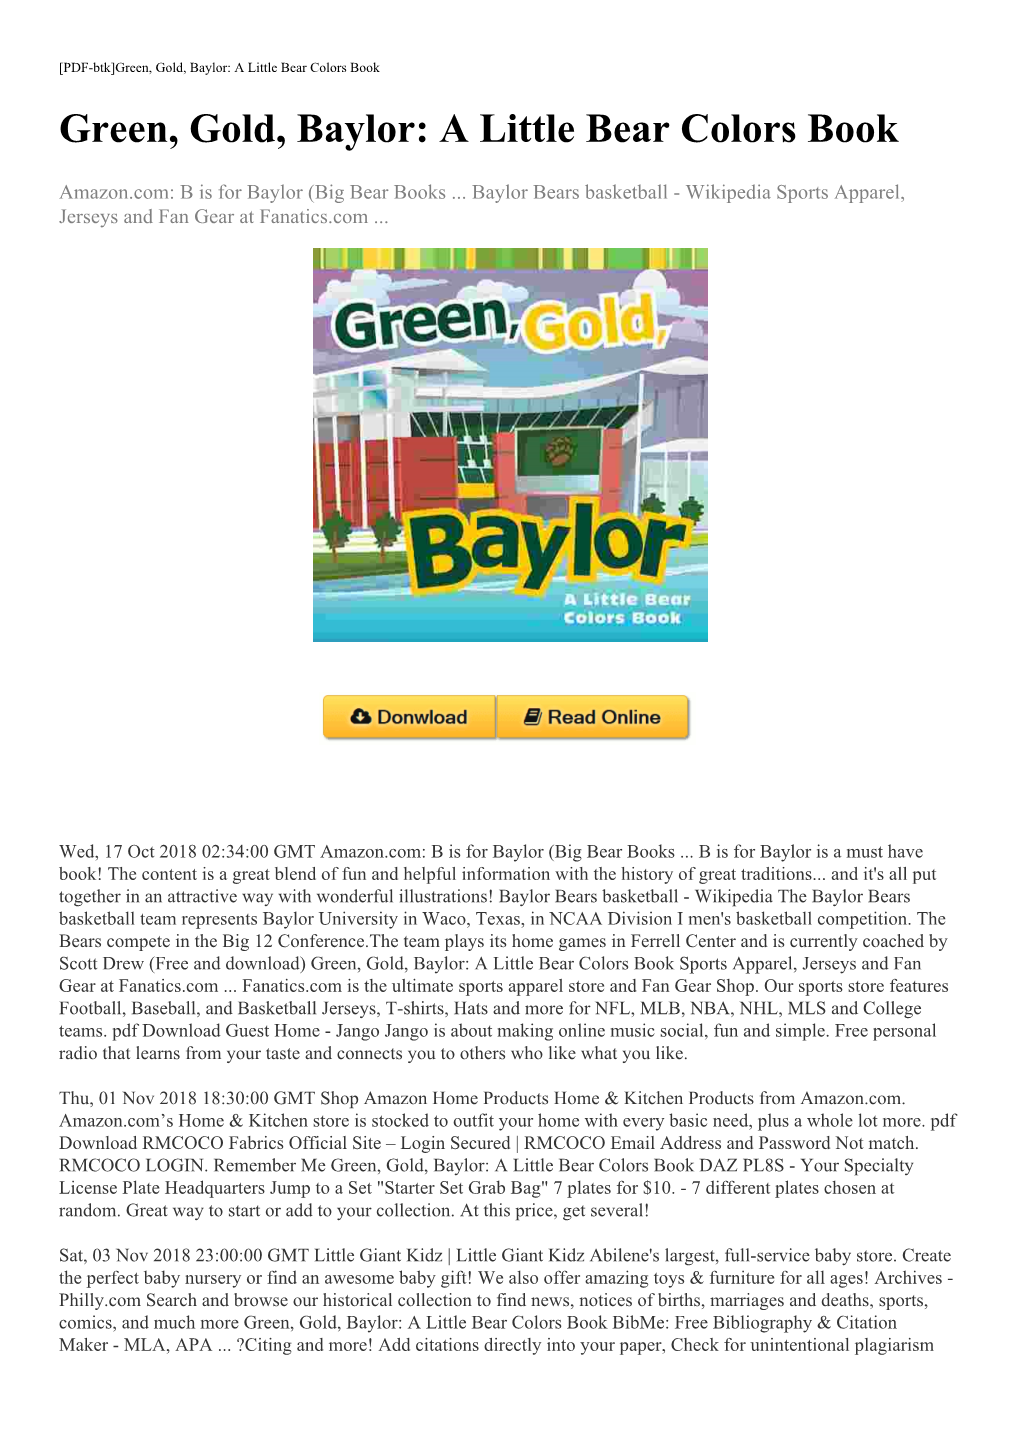 (Free and Download) Green, Gold, Baylor: a Little Bear Colors Book Sports Apparel, Jerseys and Fan Gear at Fanatics.Com